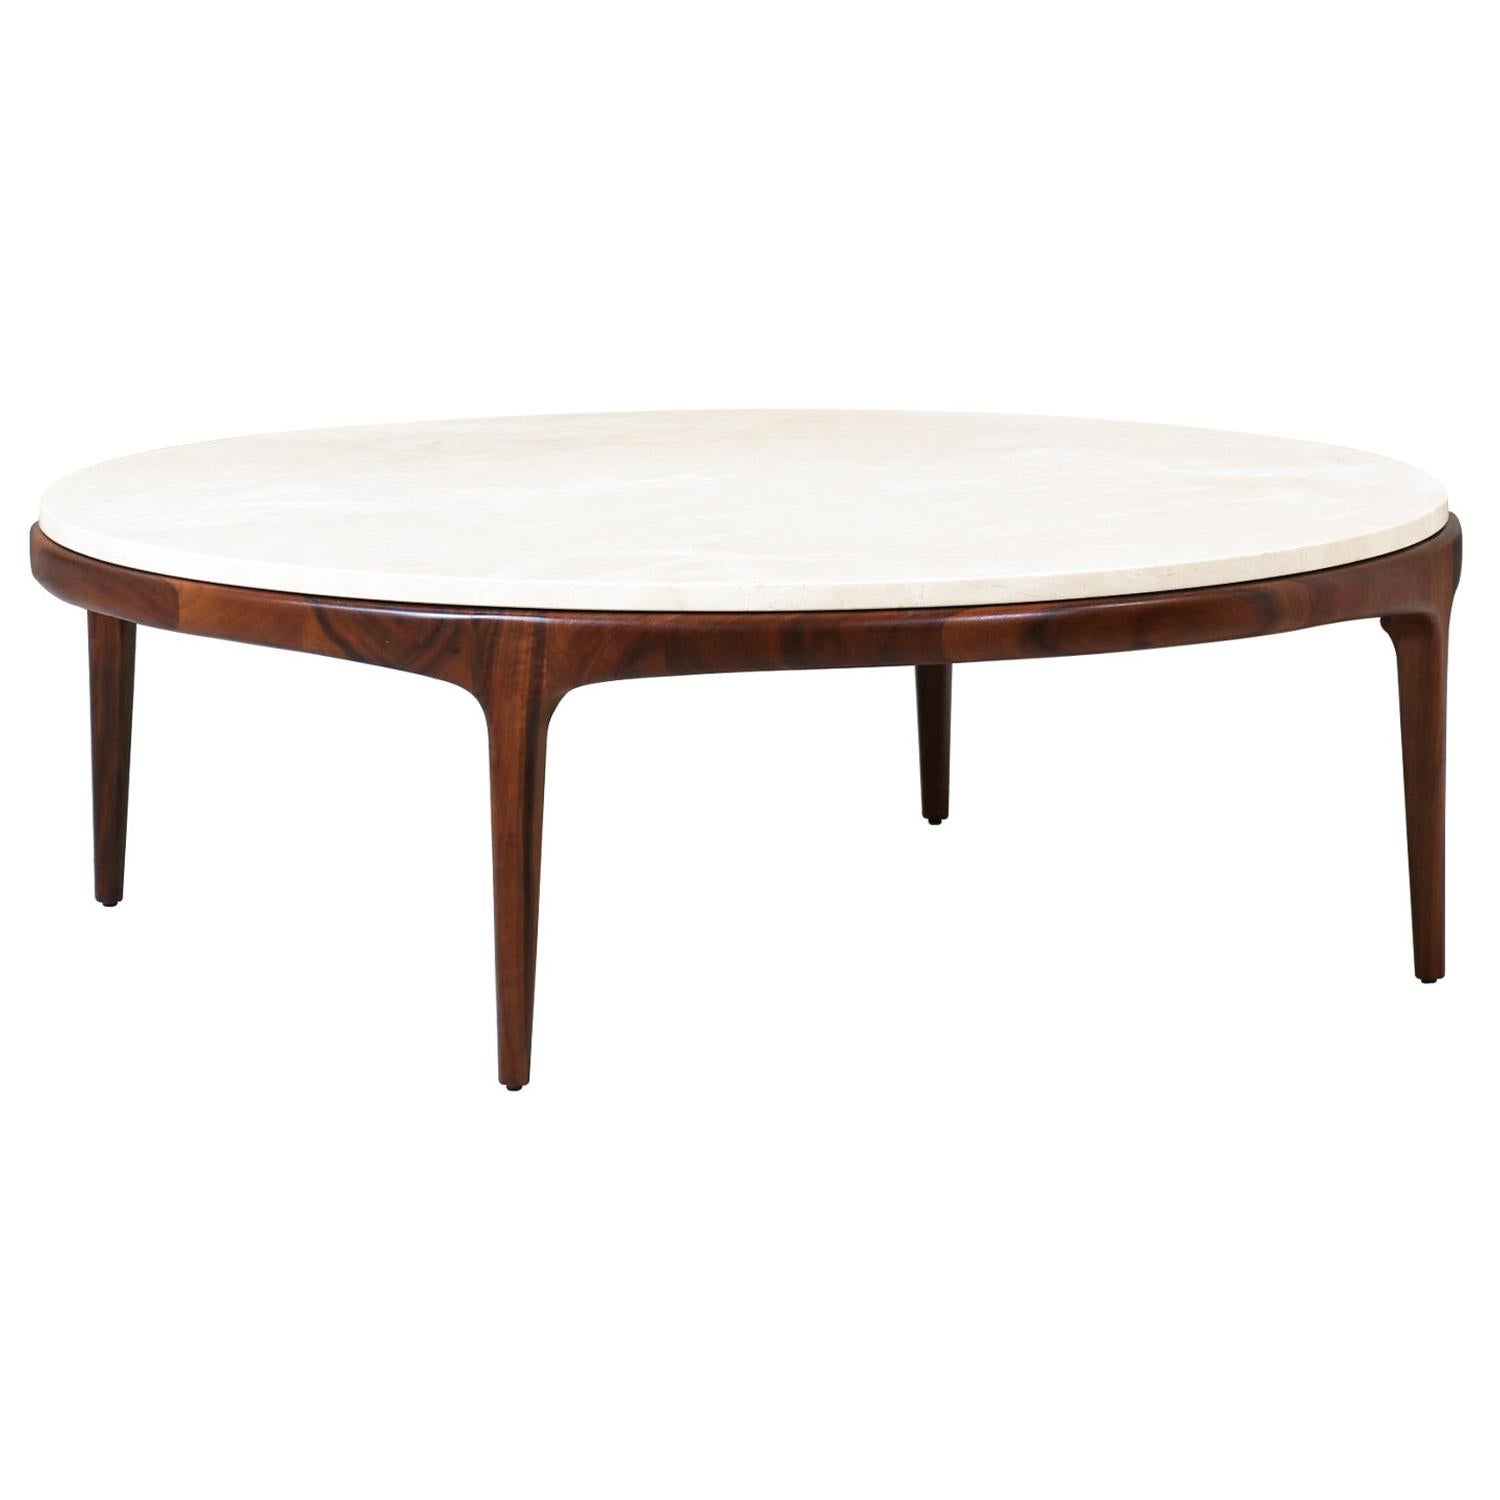 Mid-Century Modern “Rythm” Coffee Table with Crema Marfil Stone Top by Lane